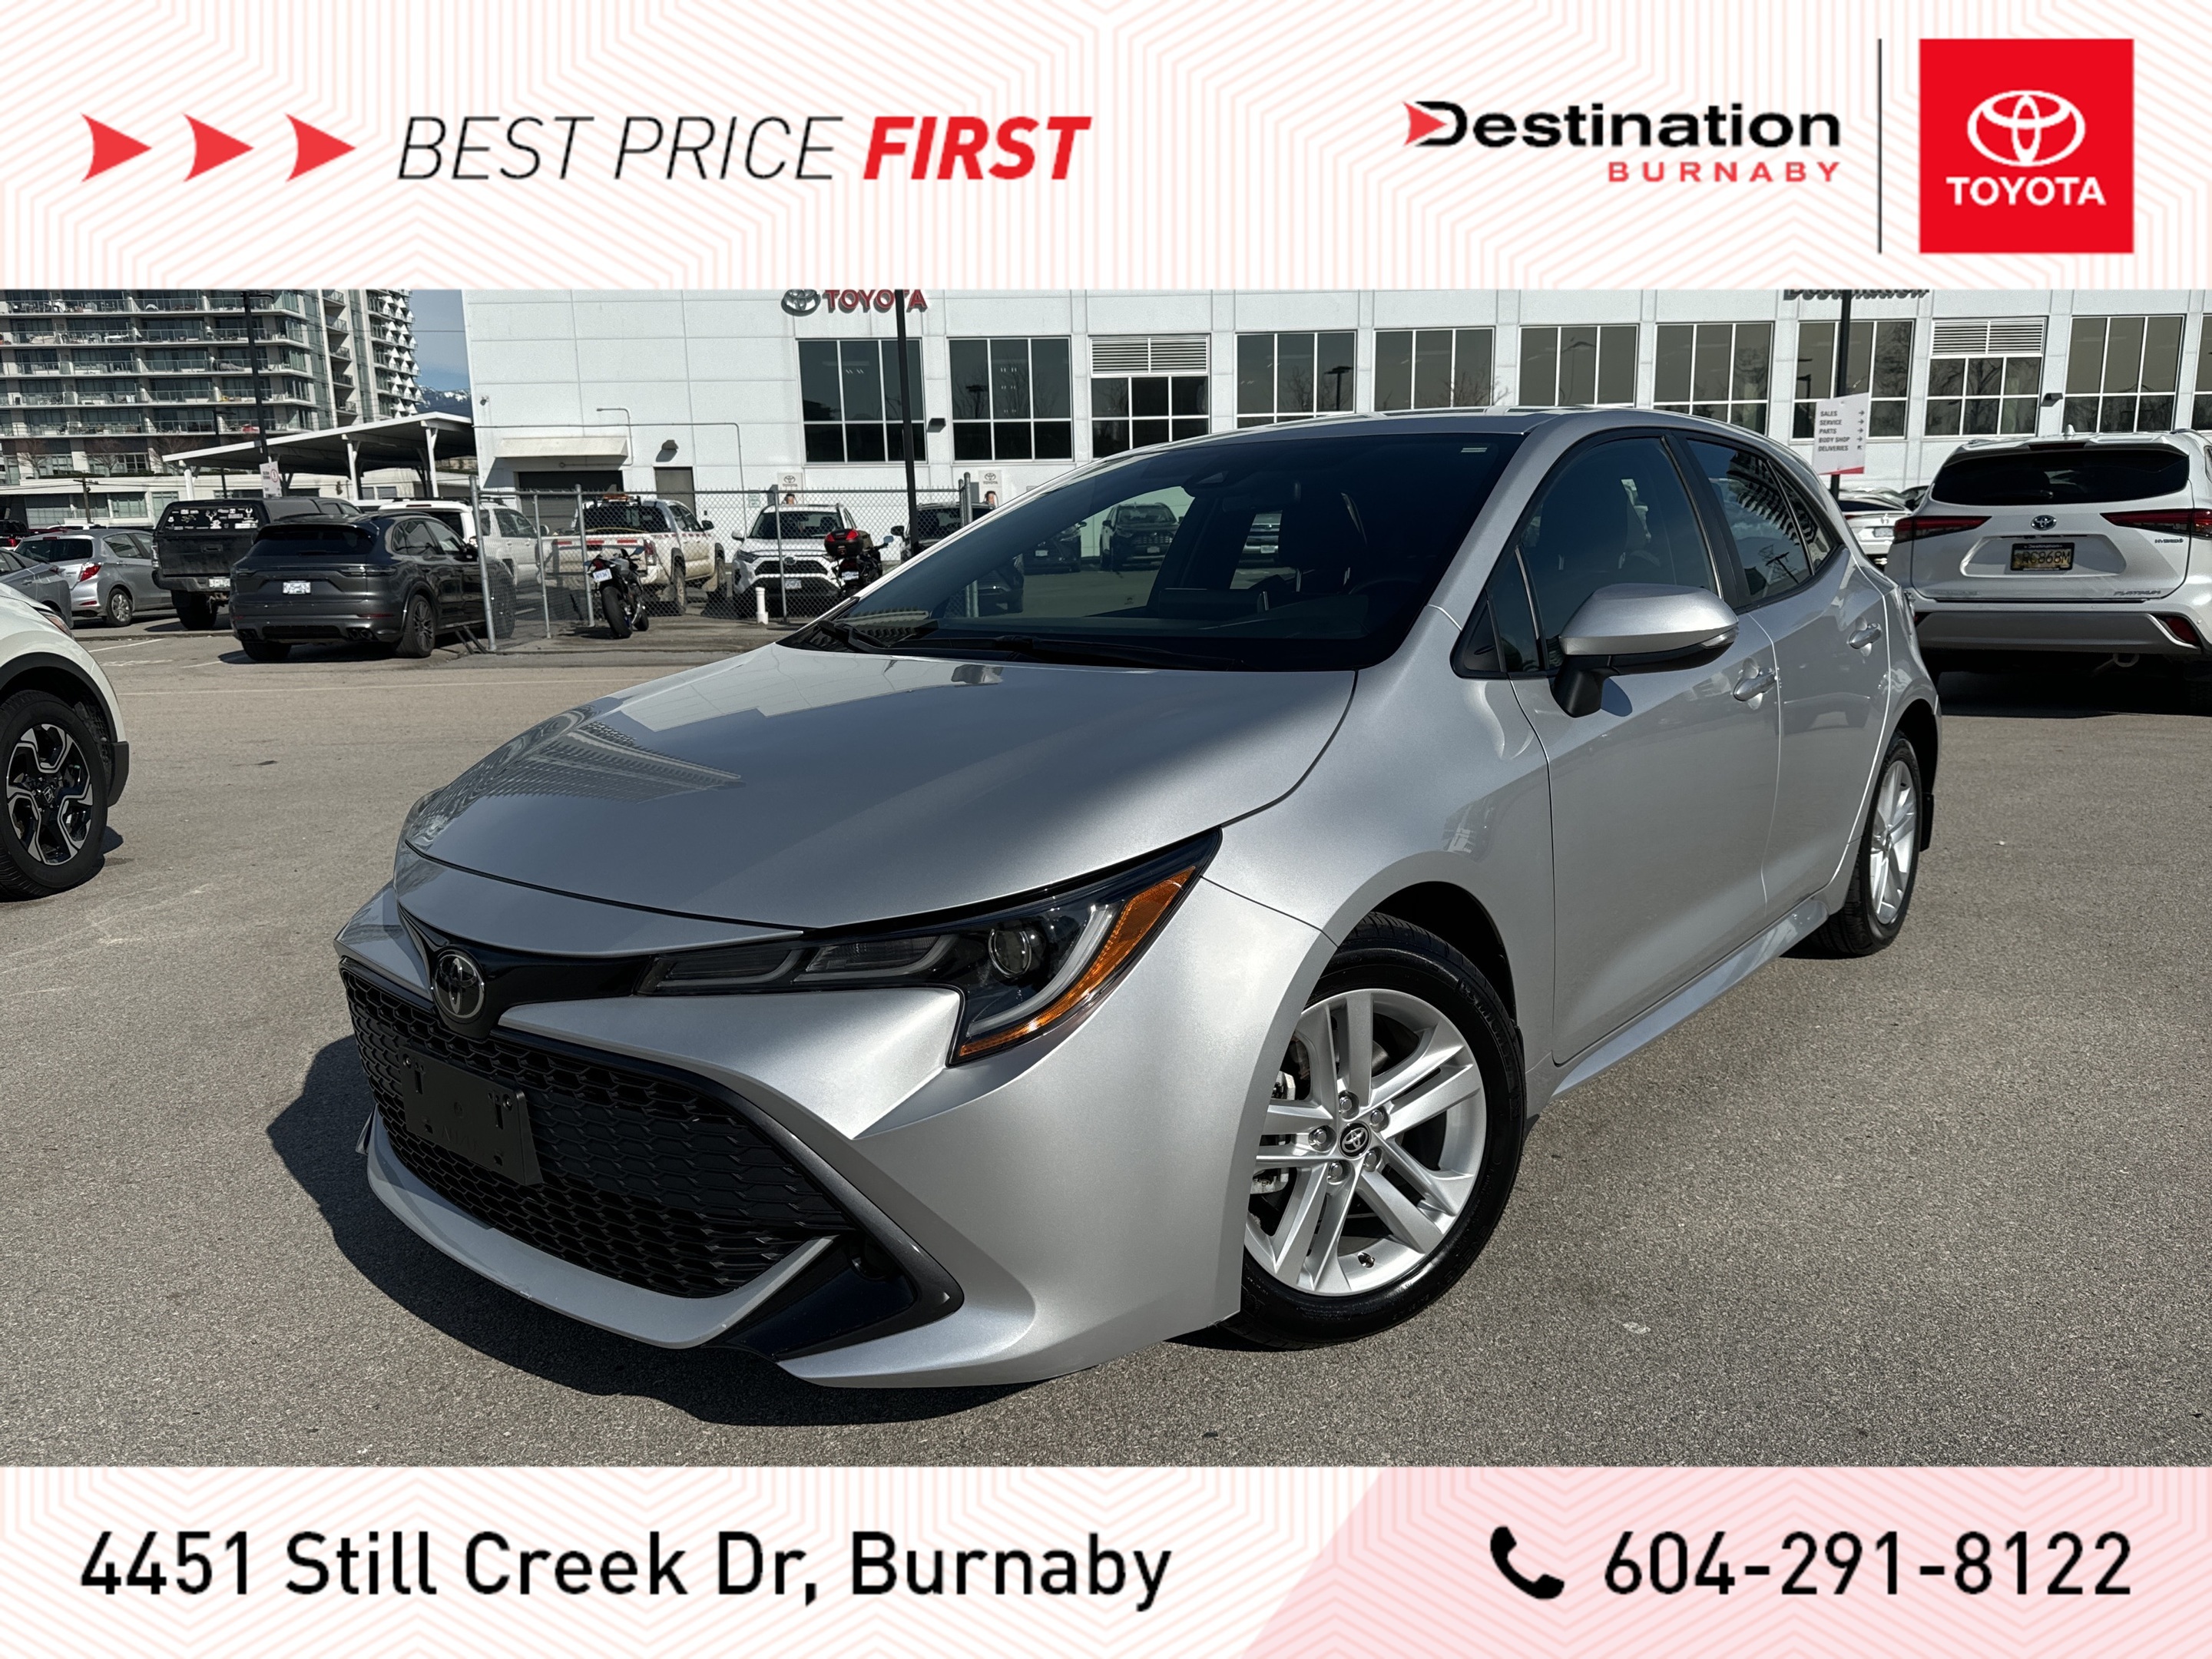 2019 Toyota Corolla SE - Locally owned car and in good shape!